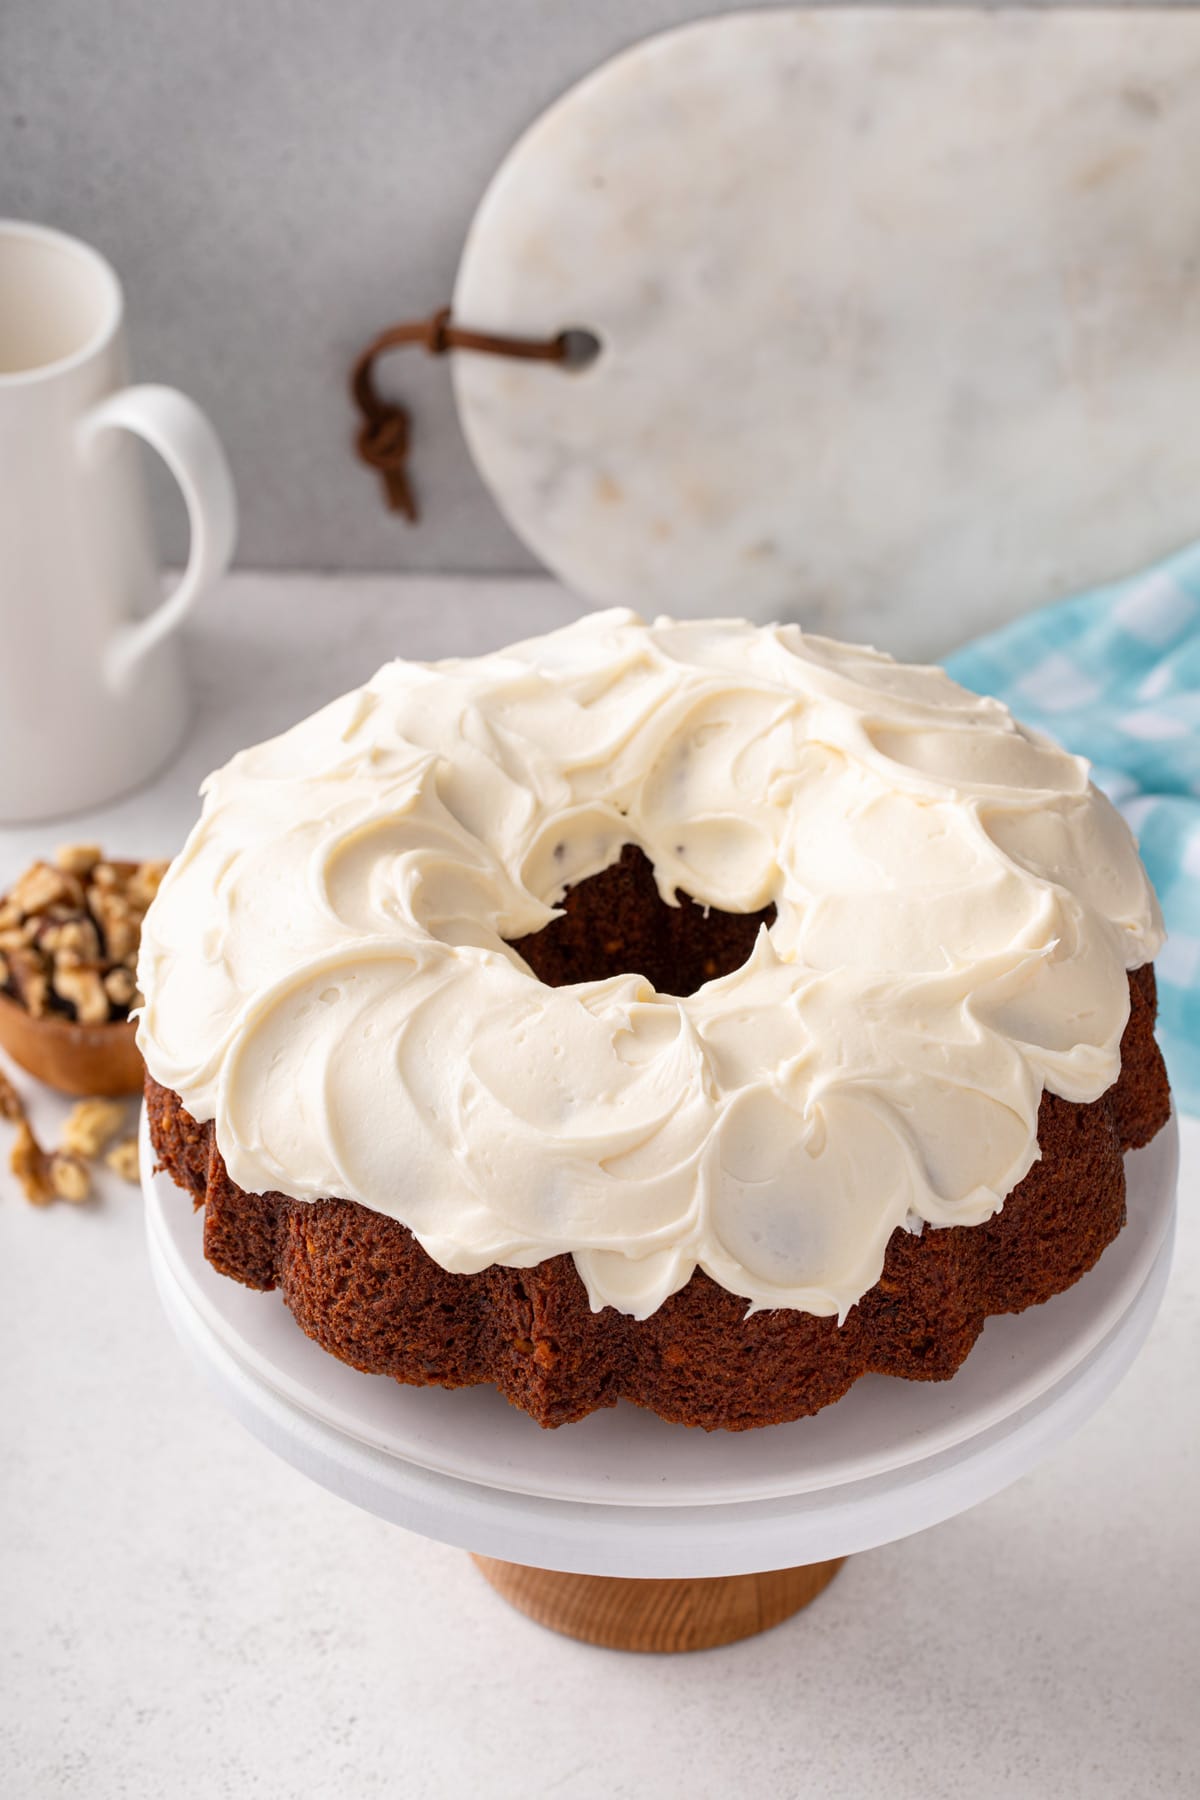 Carrot bundt cake frosted with cream cheese frosting on a white cake plate.